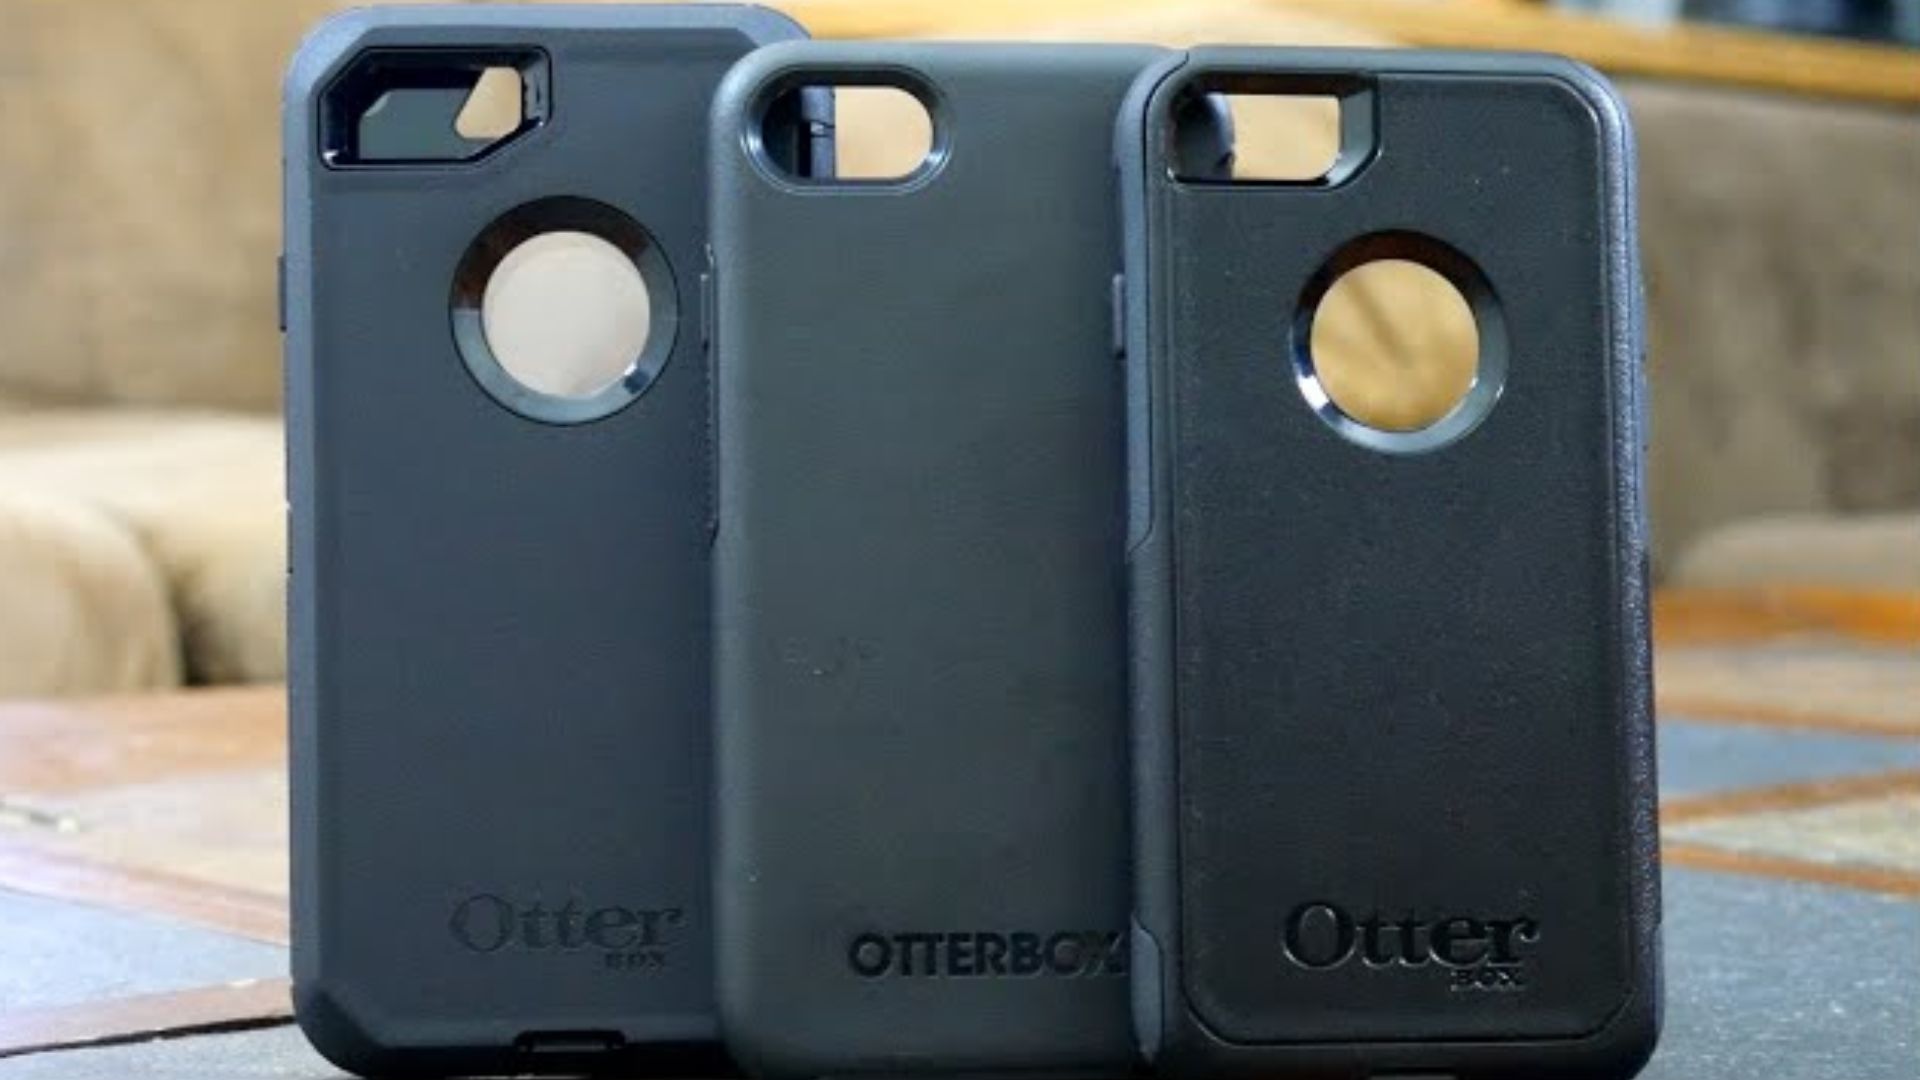 Otterbox Defender Or Commuter Series - Which Is Better Cases